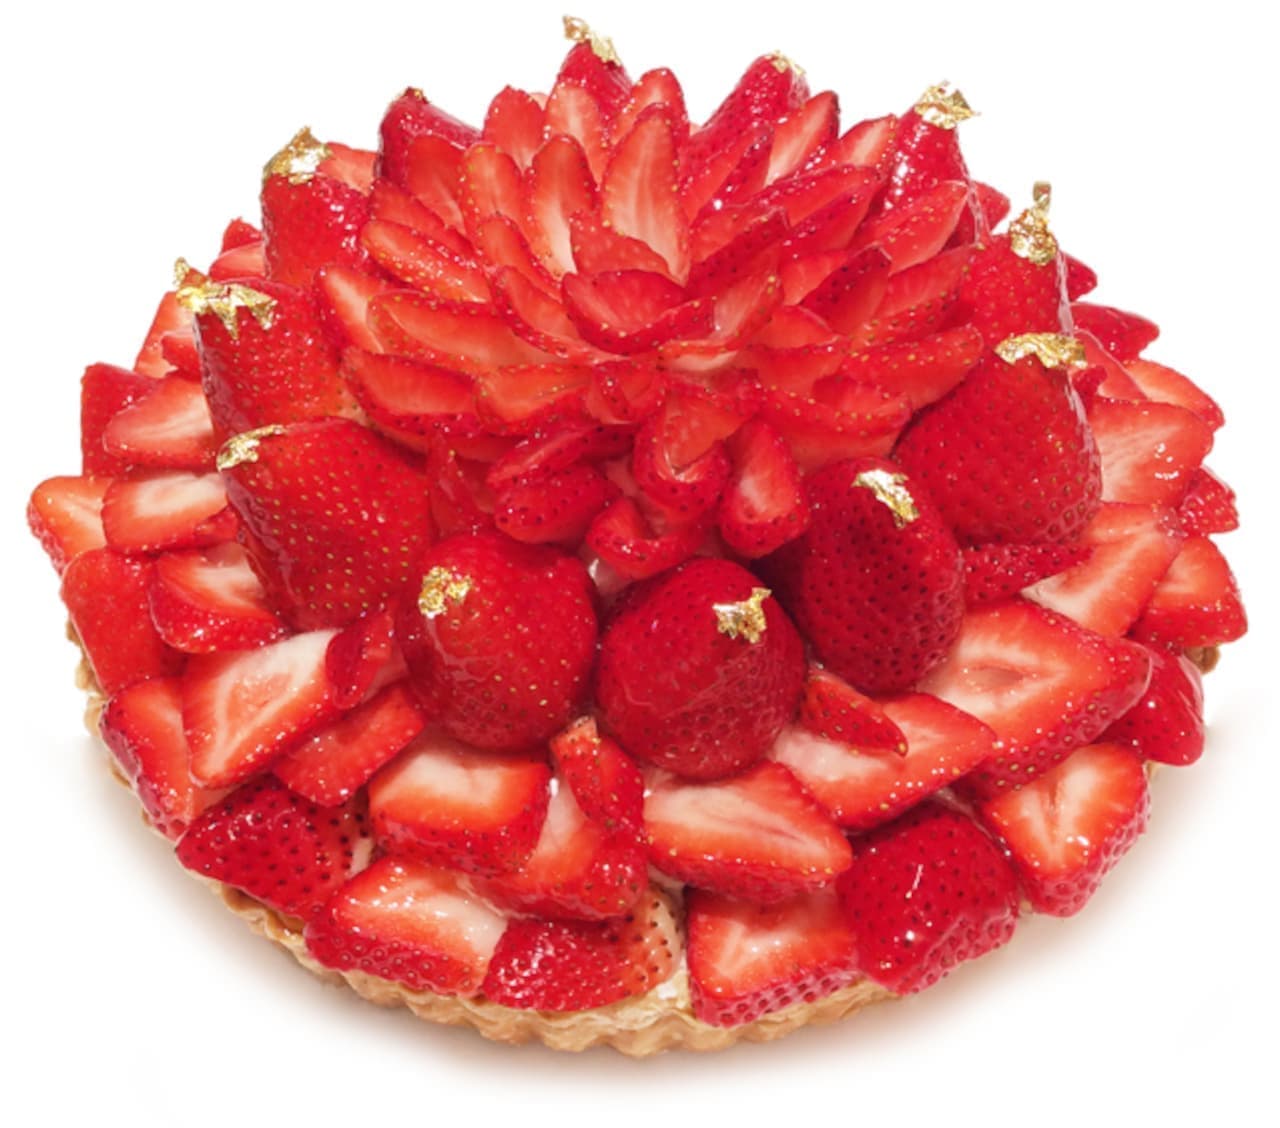 Cafe Comsa January 15 "Strawberry Day" Sweets